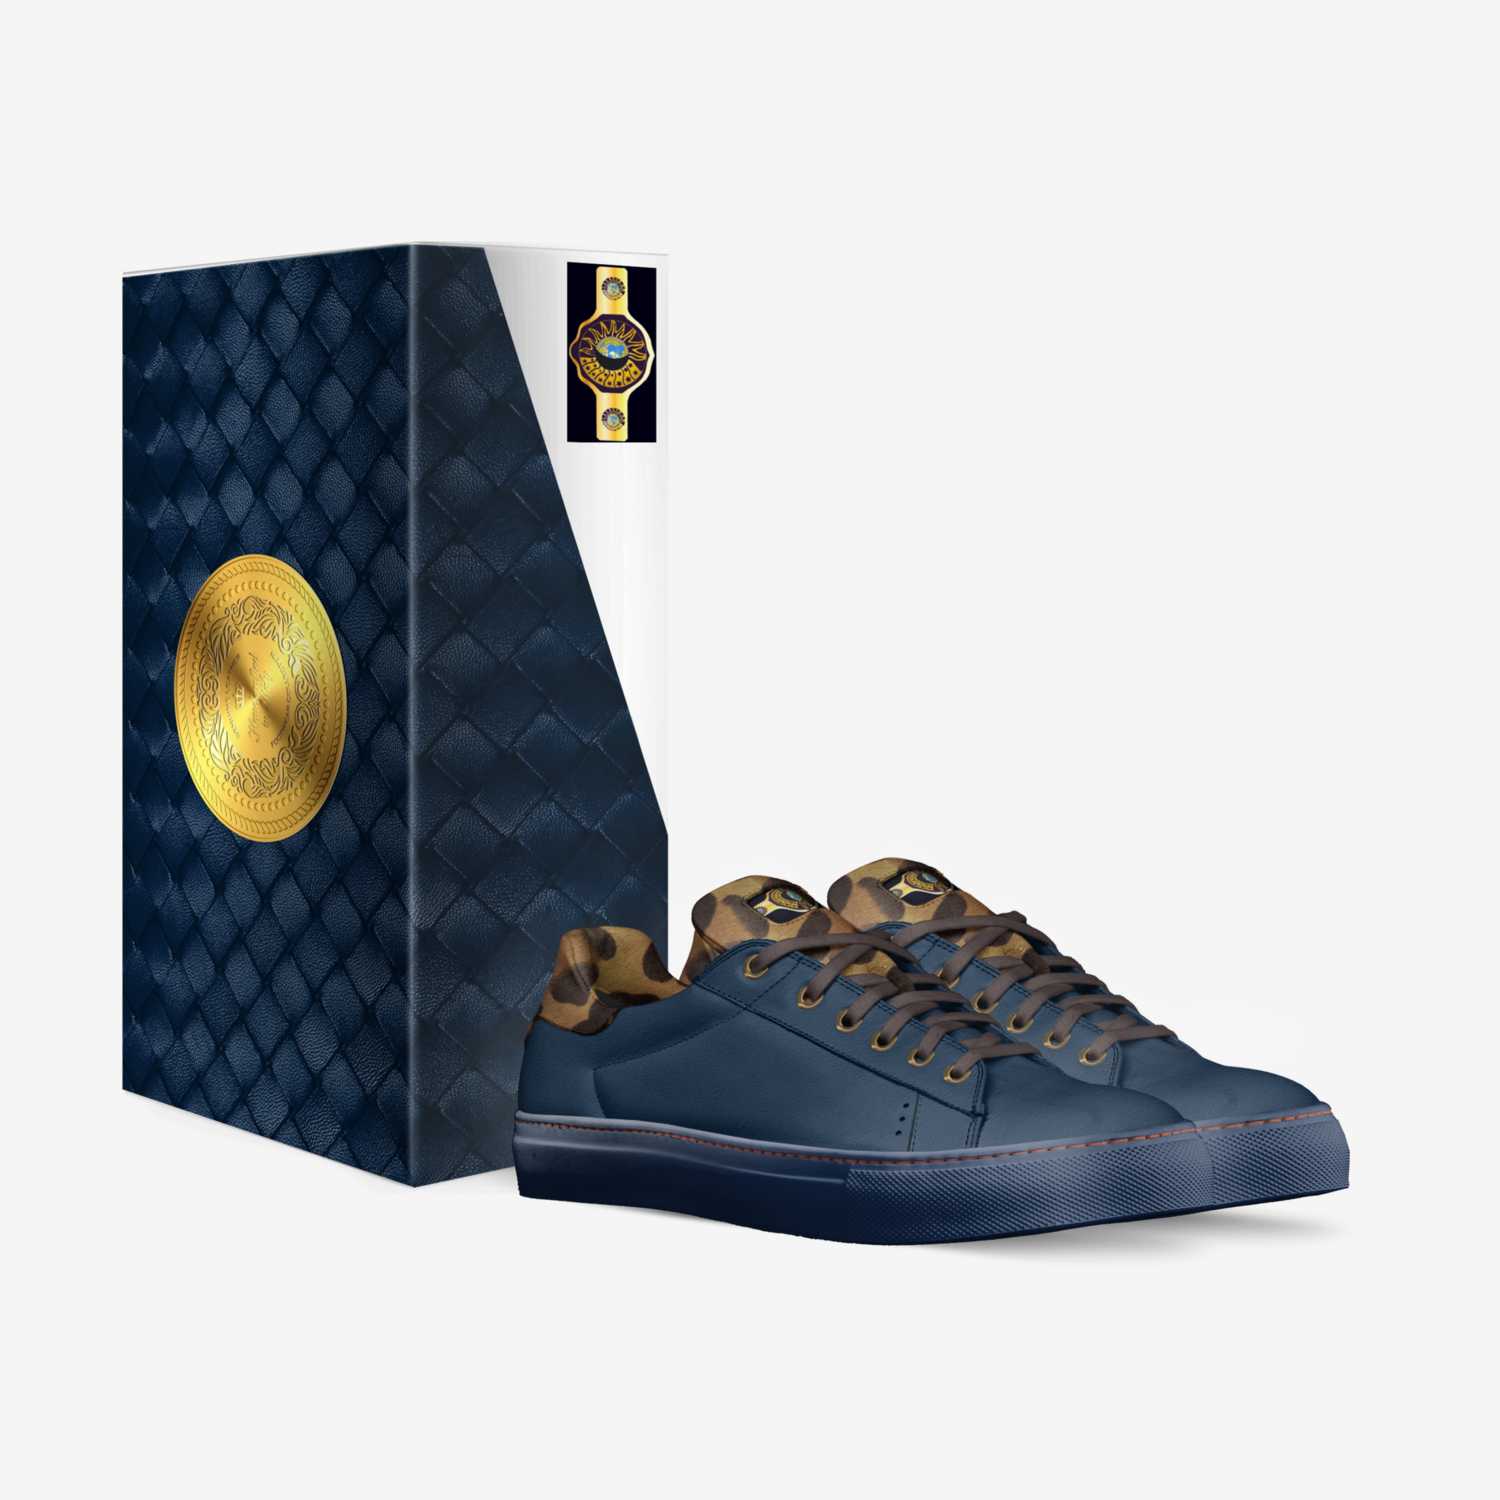 andromeda custom made in Italy shoes by Austin Freeman | Box view